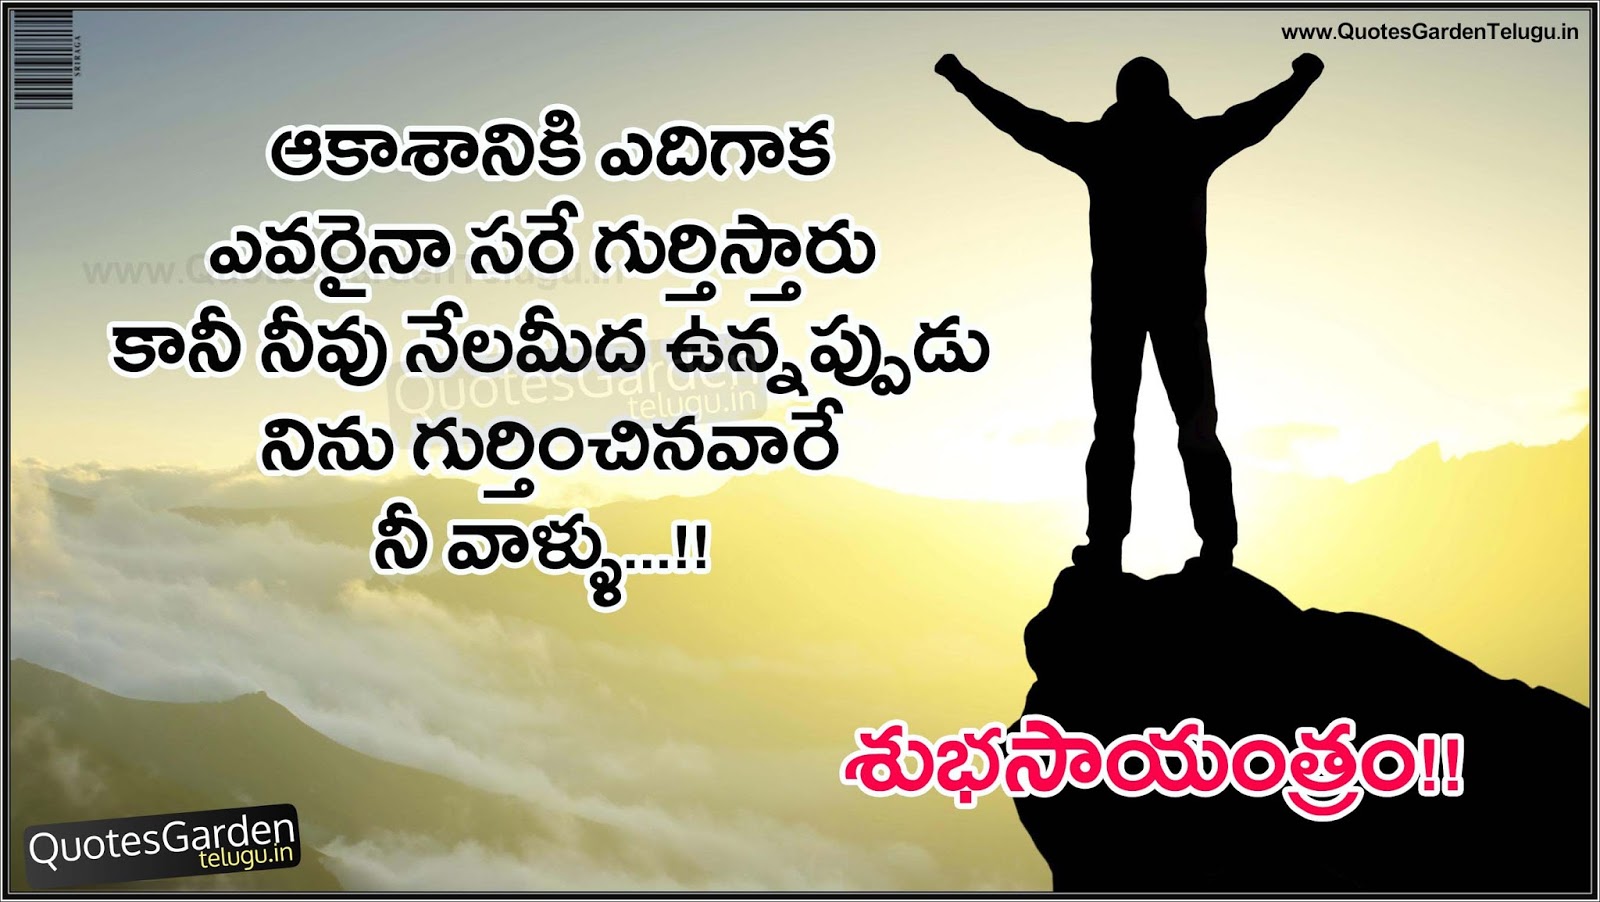 Latest Good evening Telugu Quotations wallpapers  QUOTES 